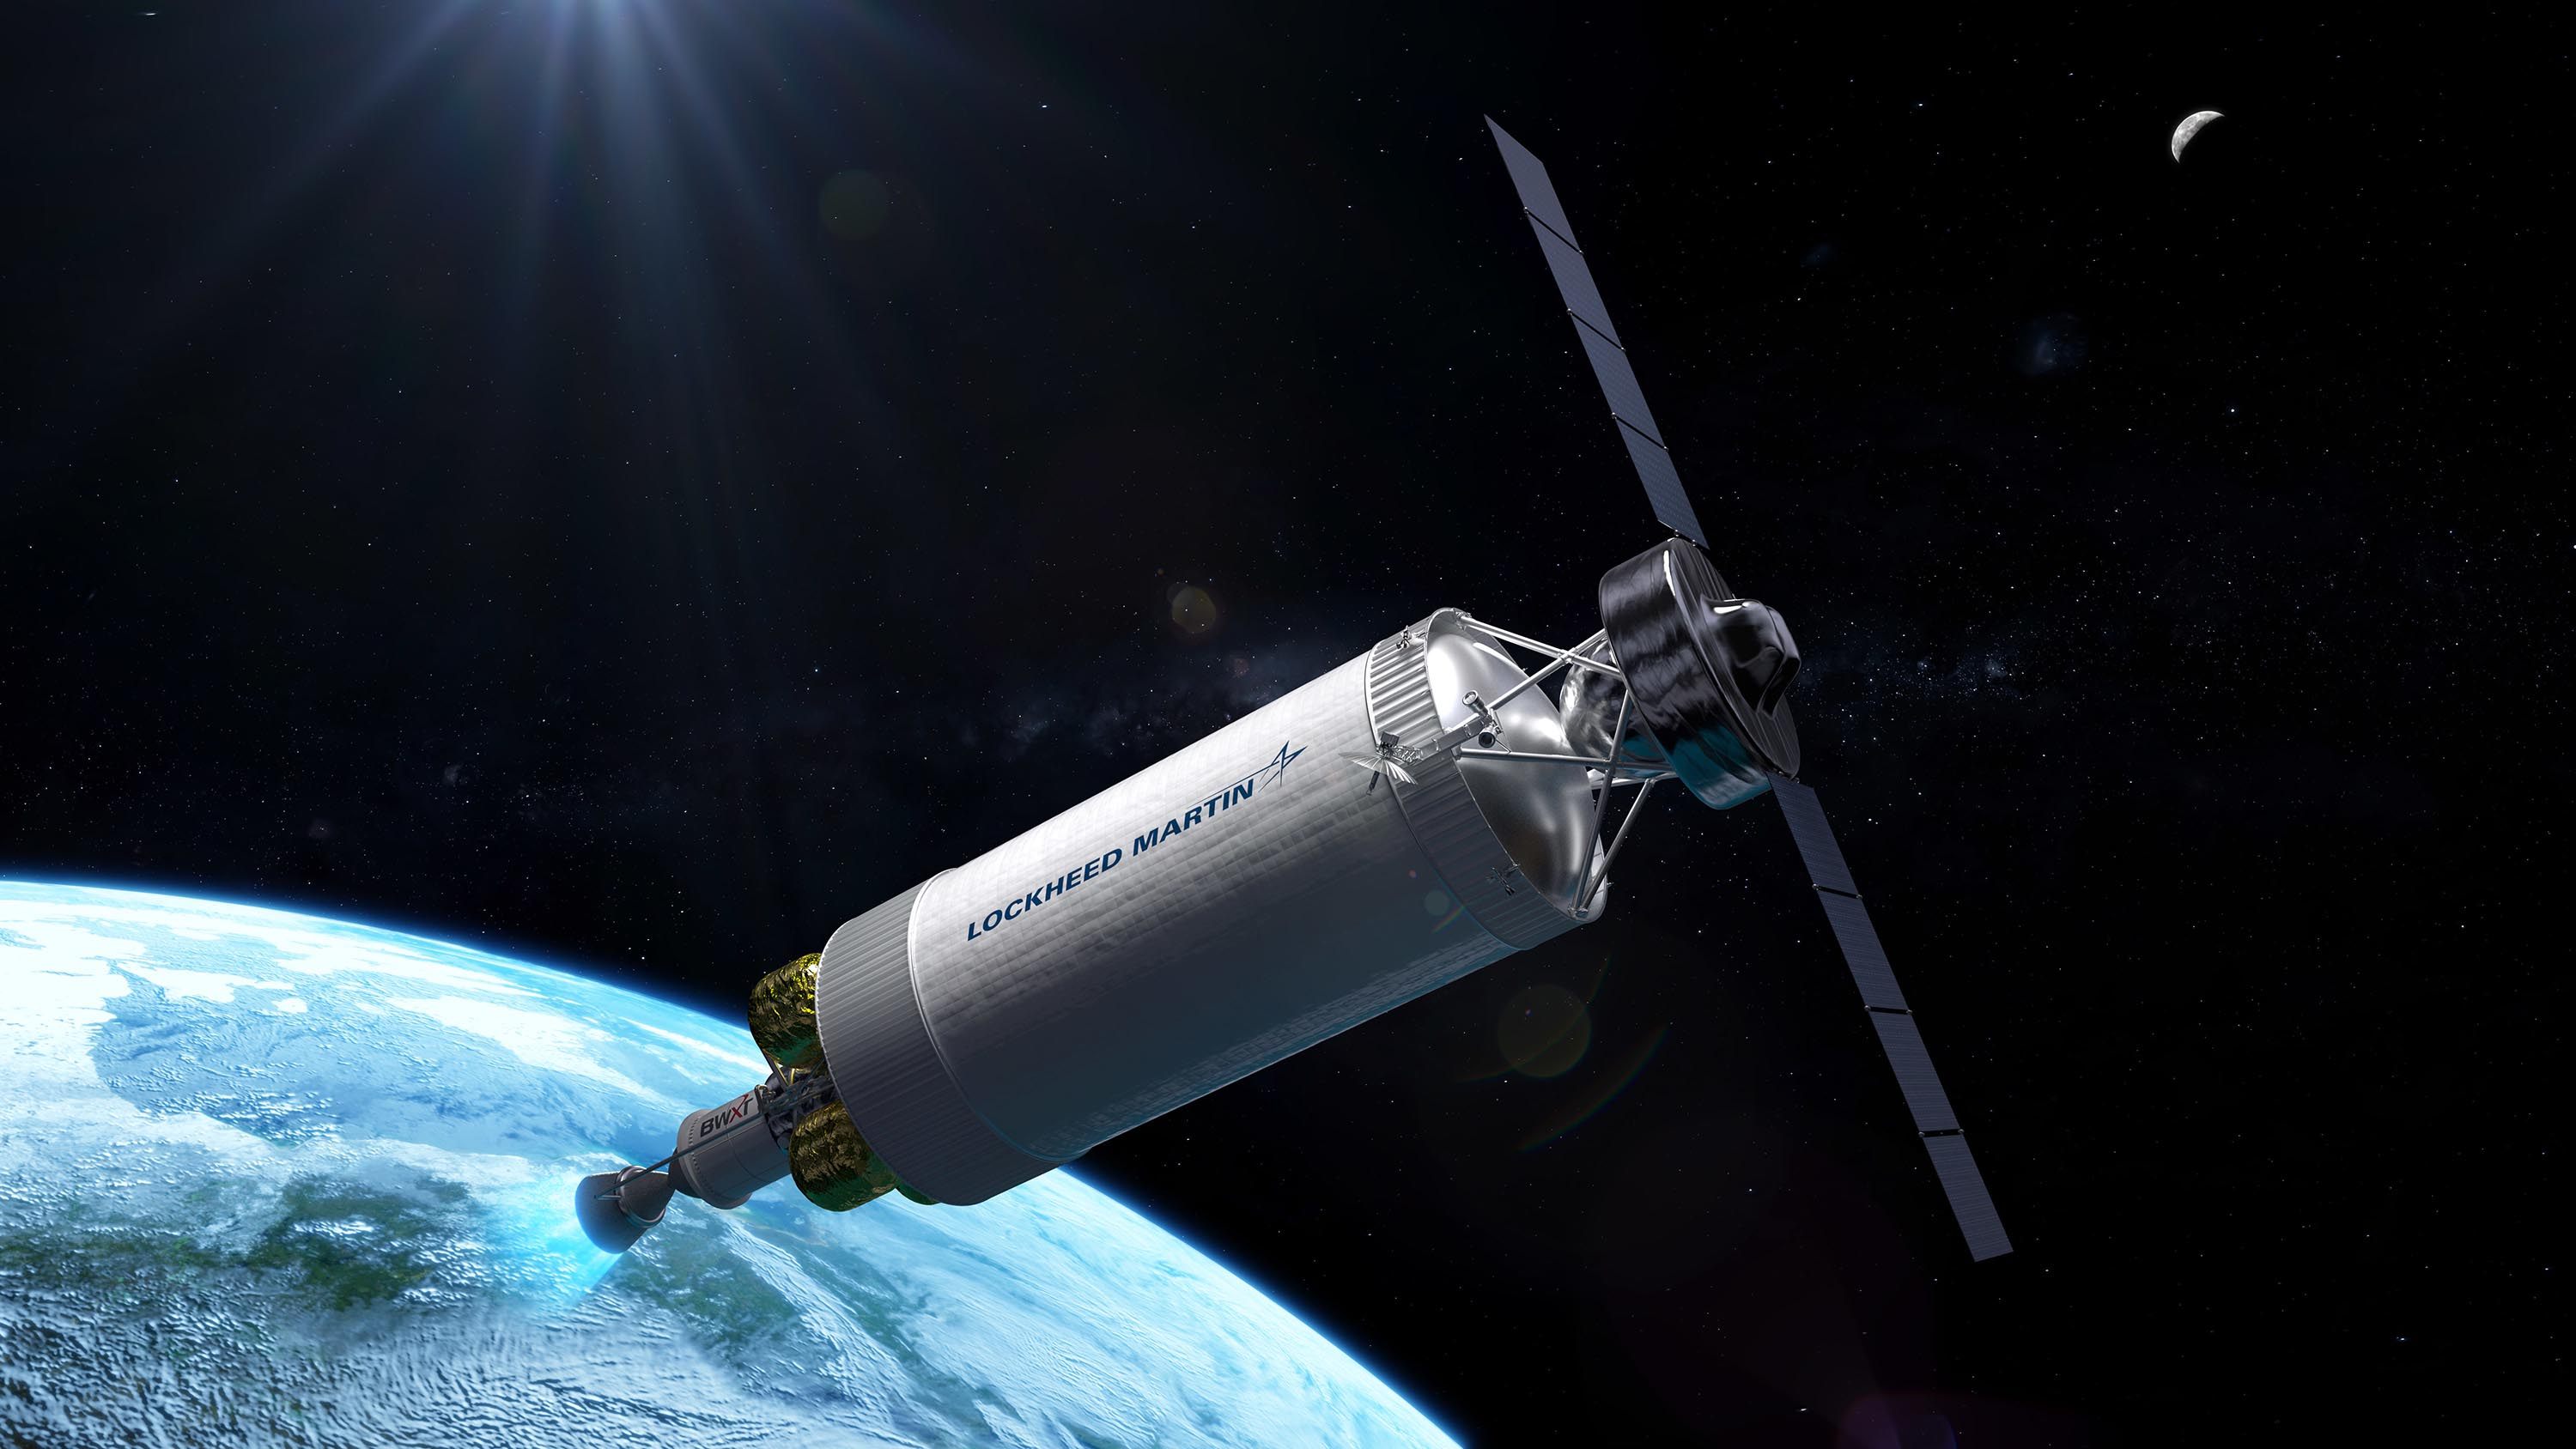 Nuclear thermal propulsion systems could cut journey times, increase fuel efficiency, and require less propellant: Photo: Lockheed Martin via TNS